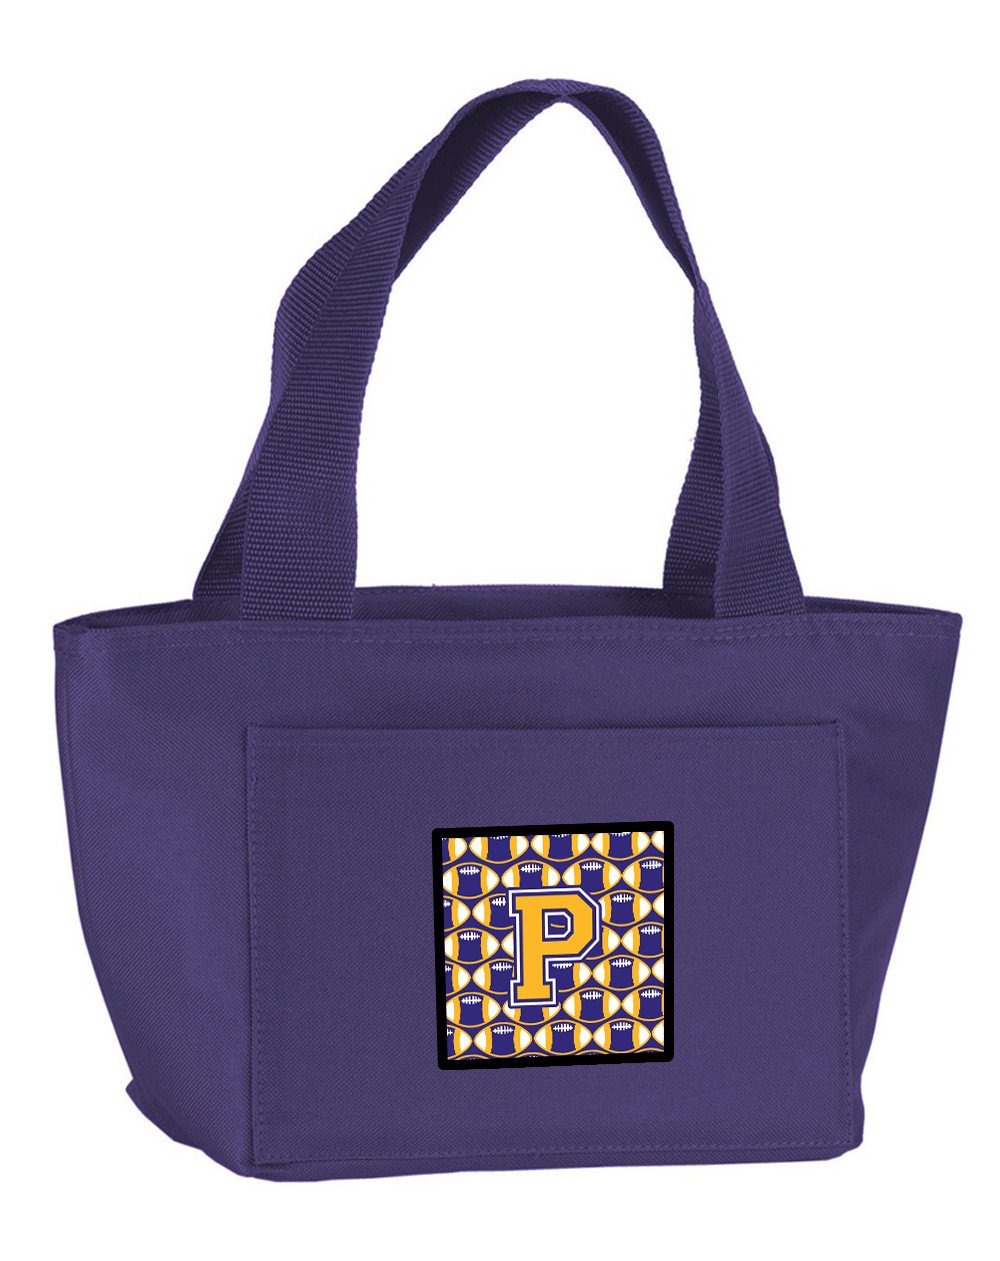 Letter P Football Purple and Gold Lunch Bag CJ1064-PPR-8808 by Caroline's Treasures